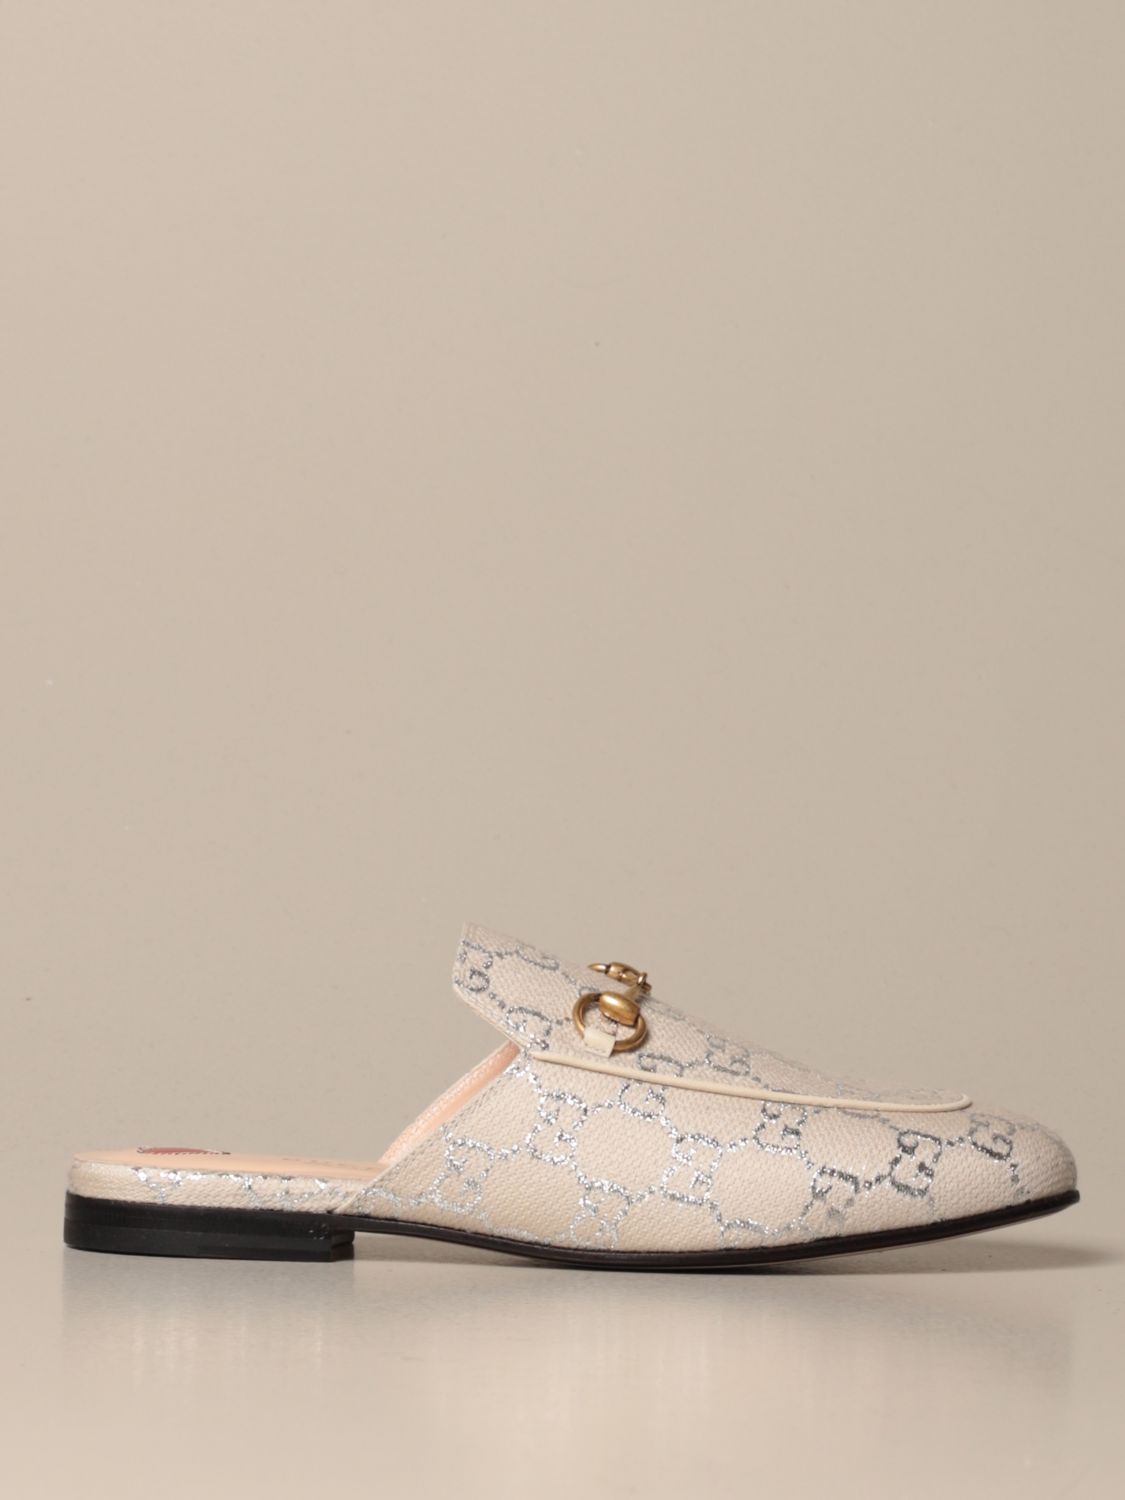 gucci women's princetown slippers